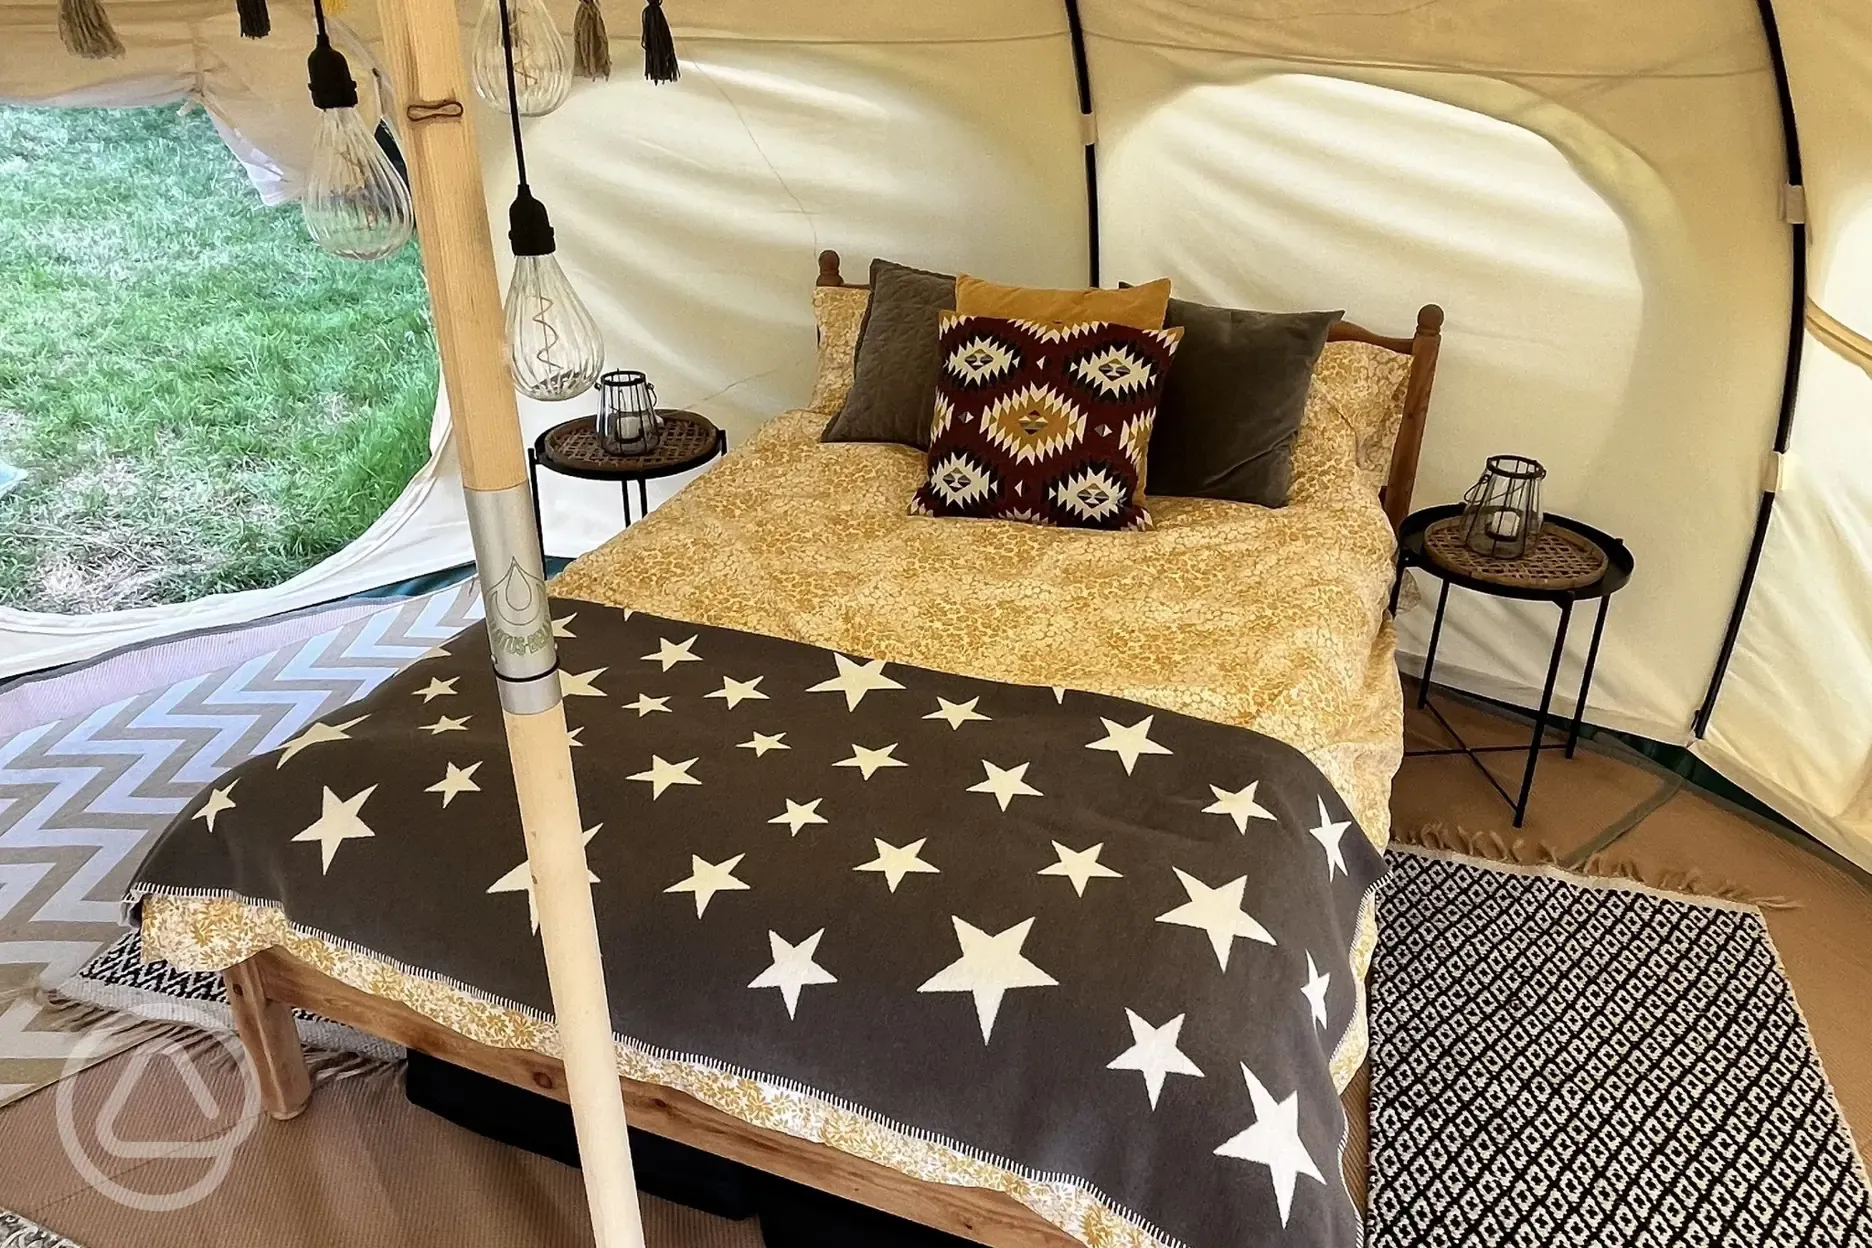 Furnished bell tent